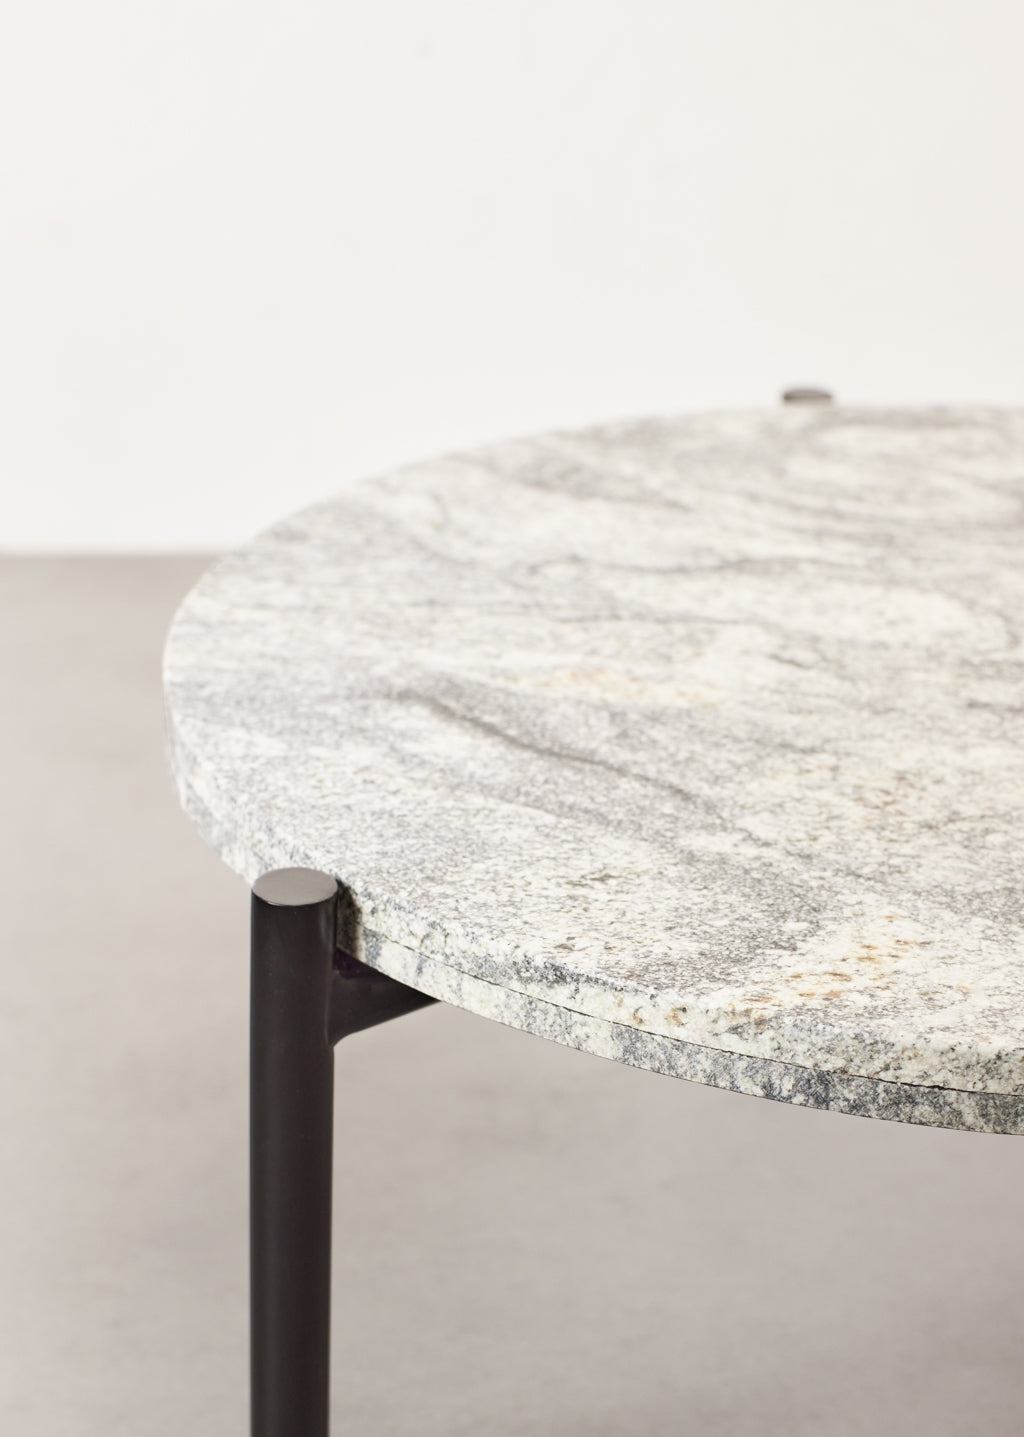 St-Laurent Marble Coffee Table